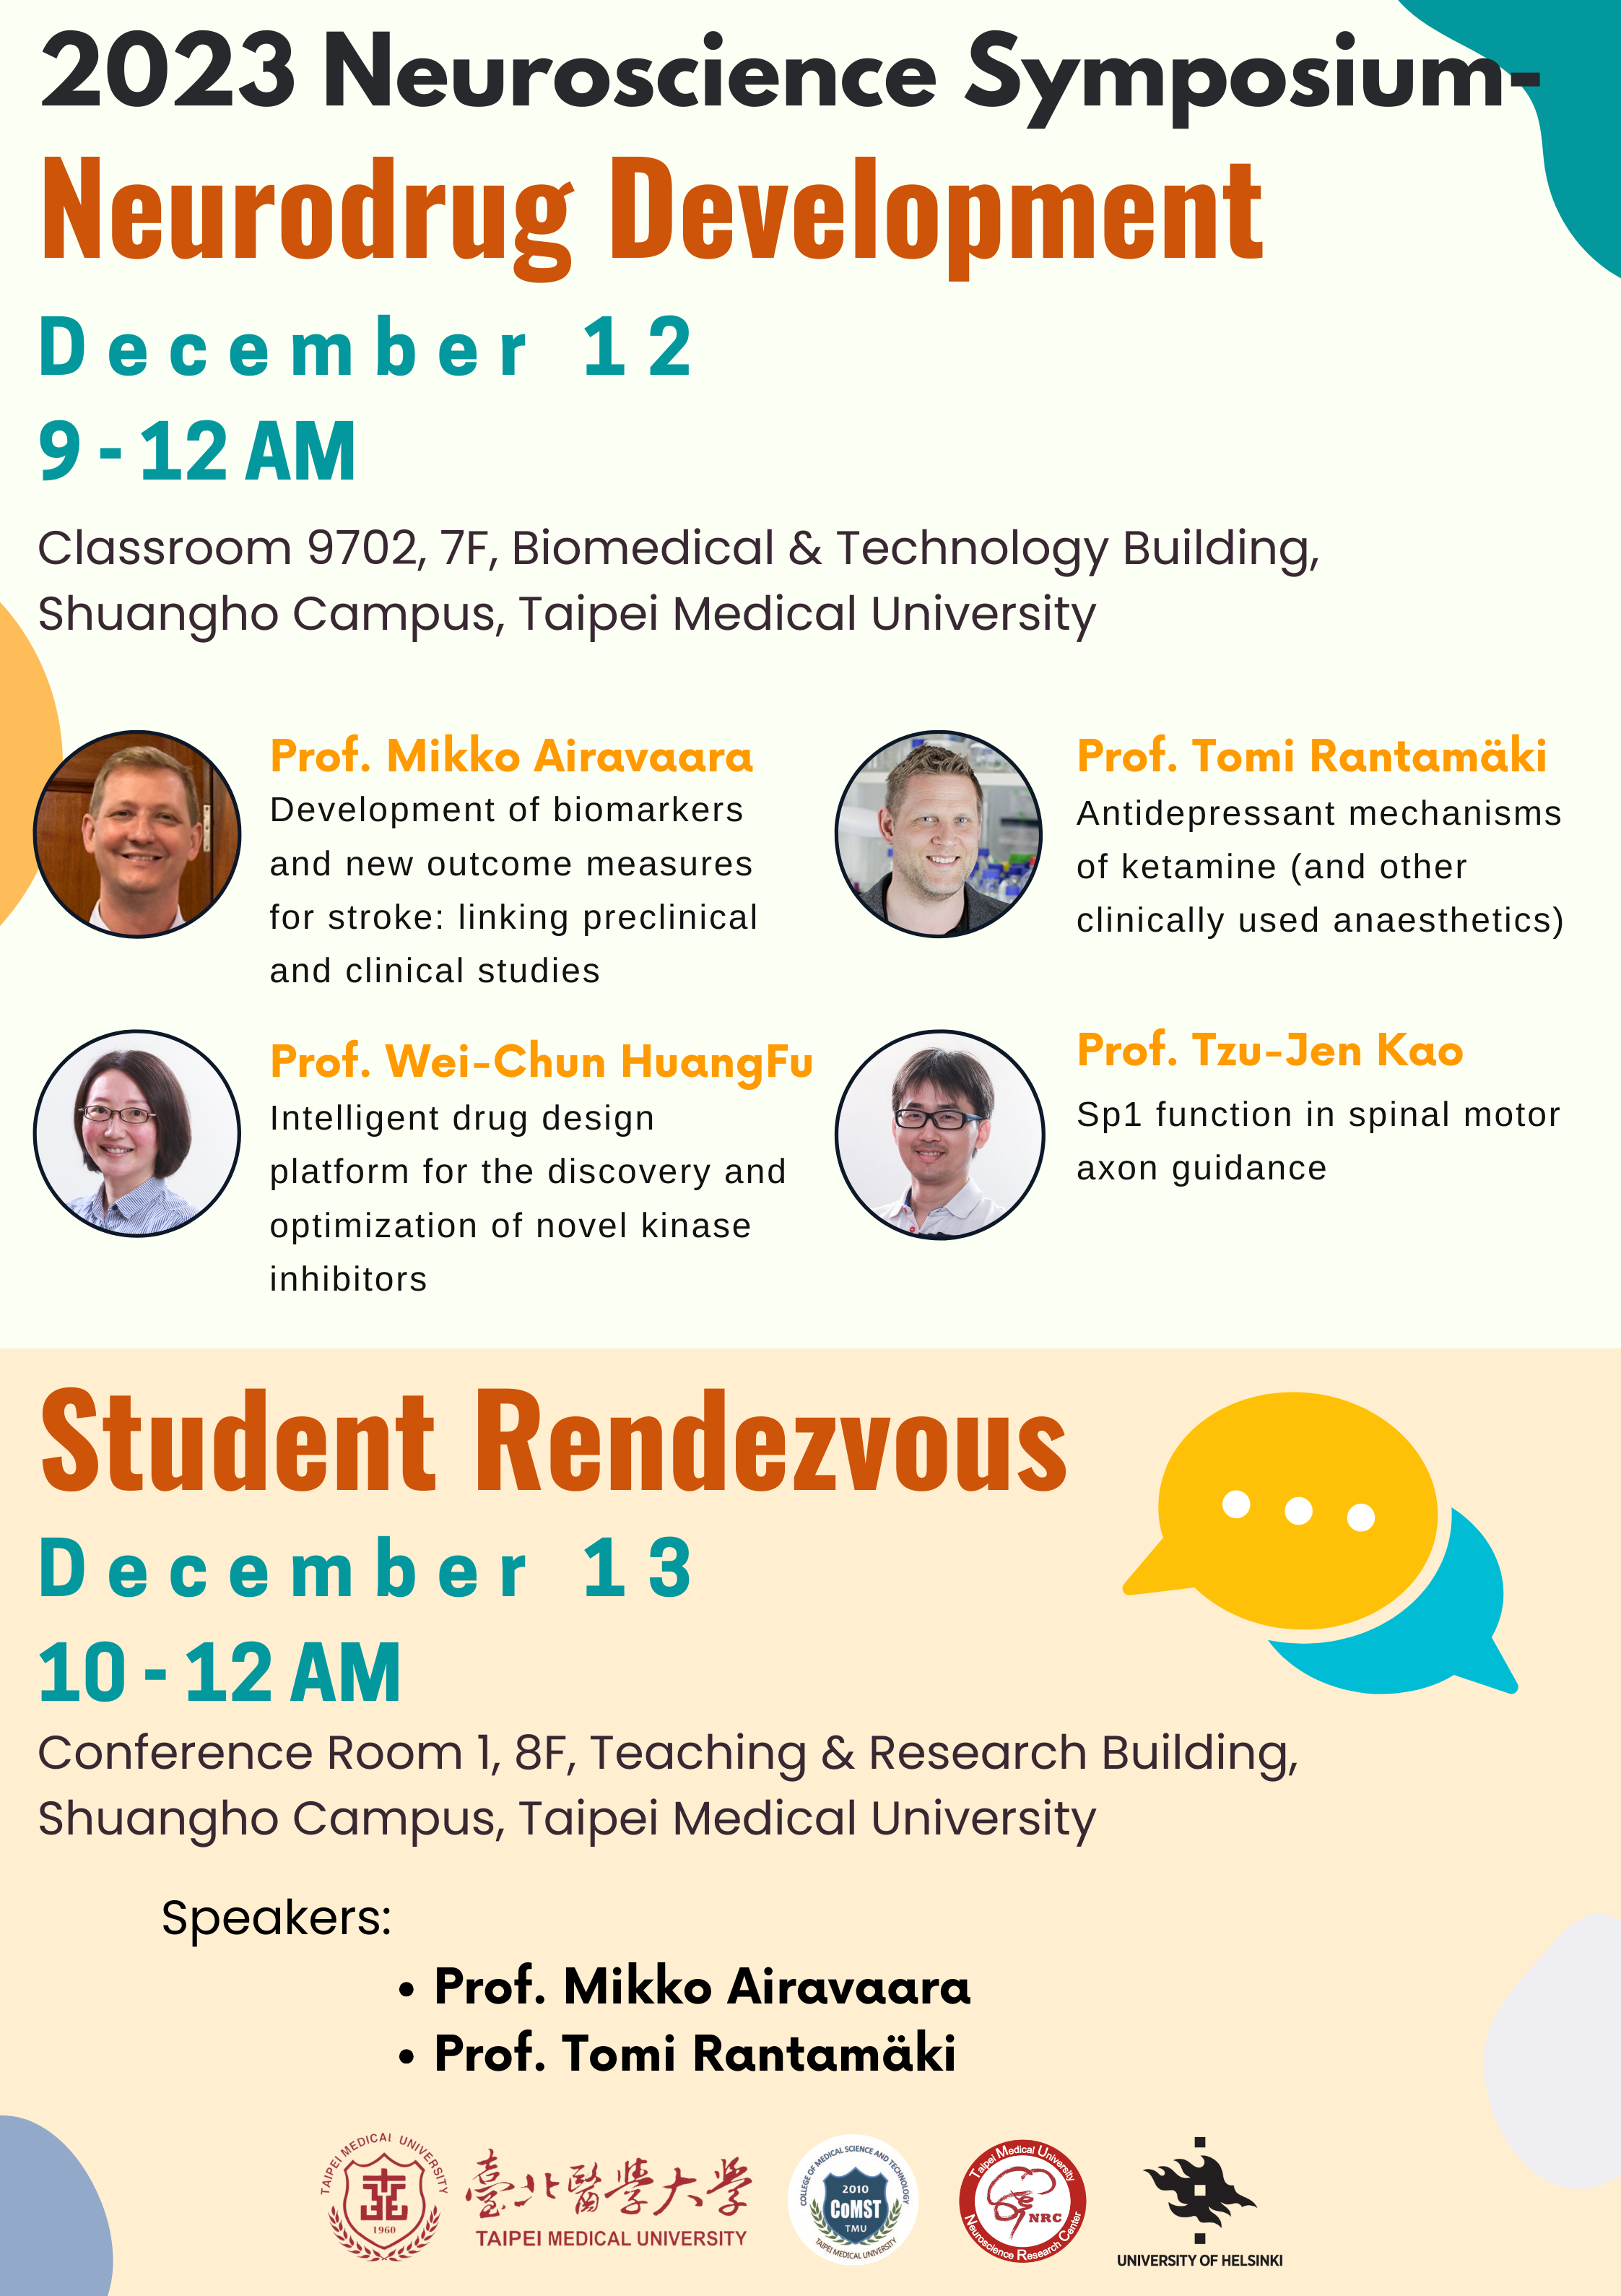 We are delighted to extend our invitation to the collaborative Neuroscience Symposium, titled "2023 Neuroscience Symposium - Neurodrug Development," jointly organized by the University of Helsinki and Taipei Medical University. The event is scheduled for December 12, 2023, at 9:00 AM. @Conferance Room 1, 8F, Teaching & Reseach Building, Shuangho Campus, Taipei medical University